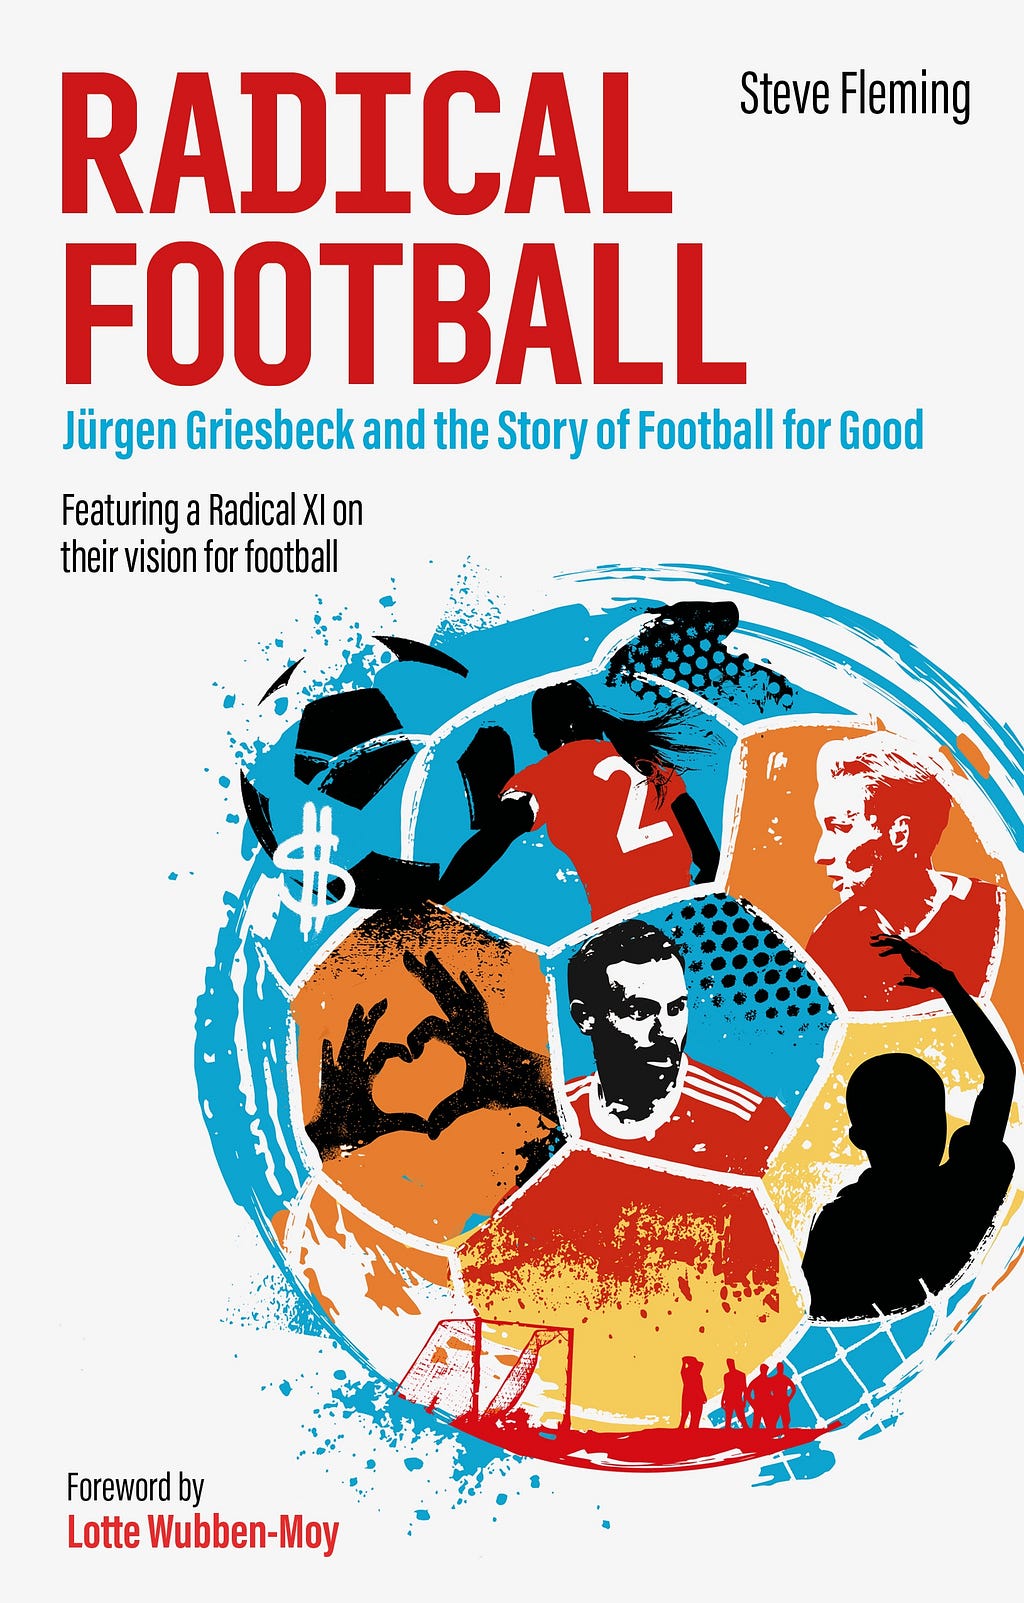 Cover of “Radical Football” book by Steve Fleming.